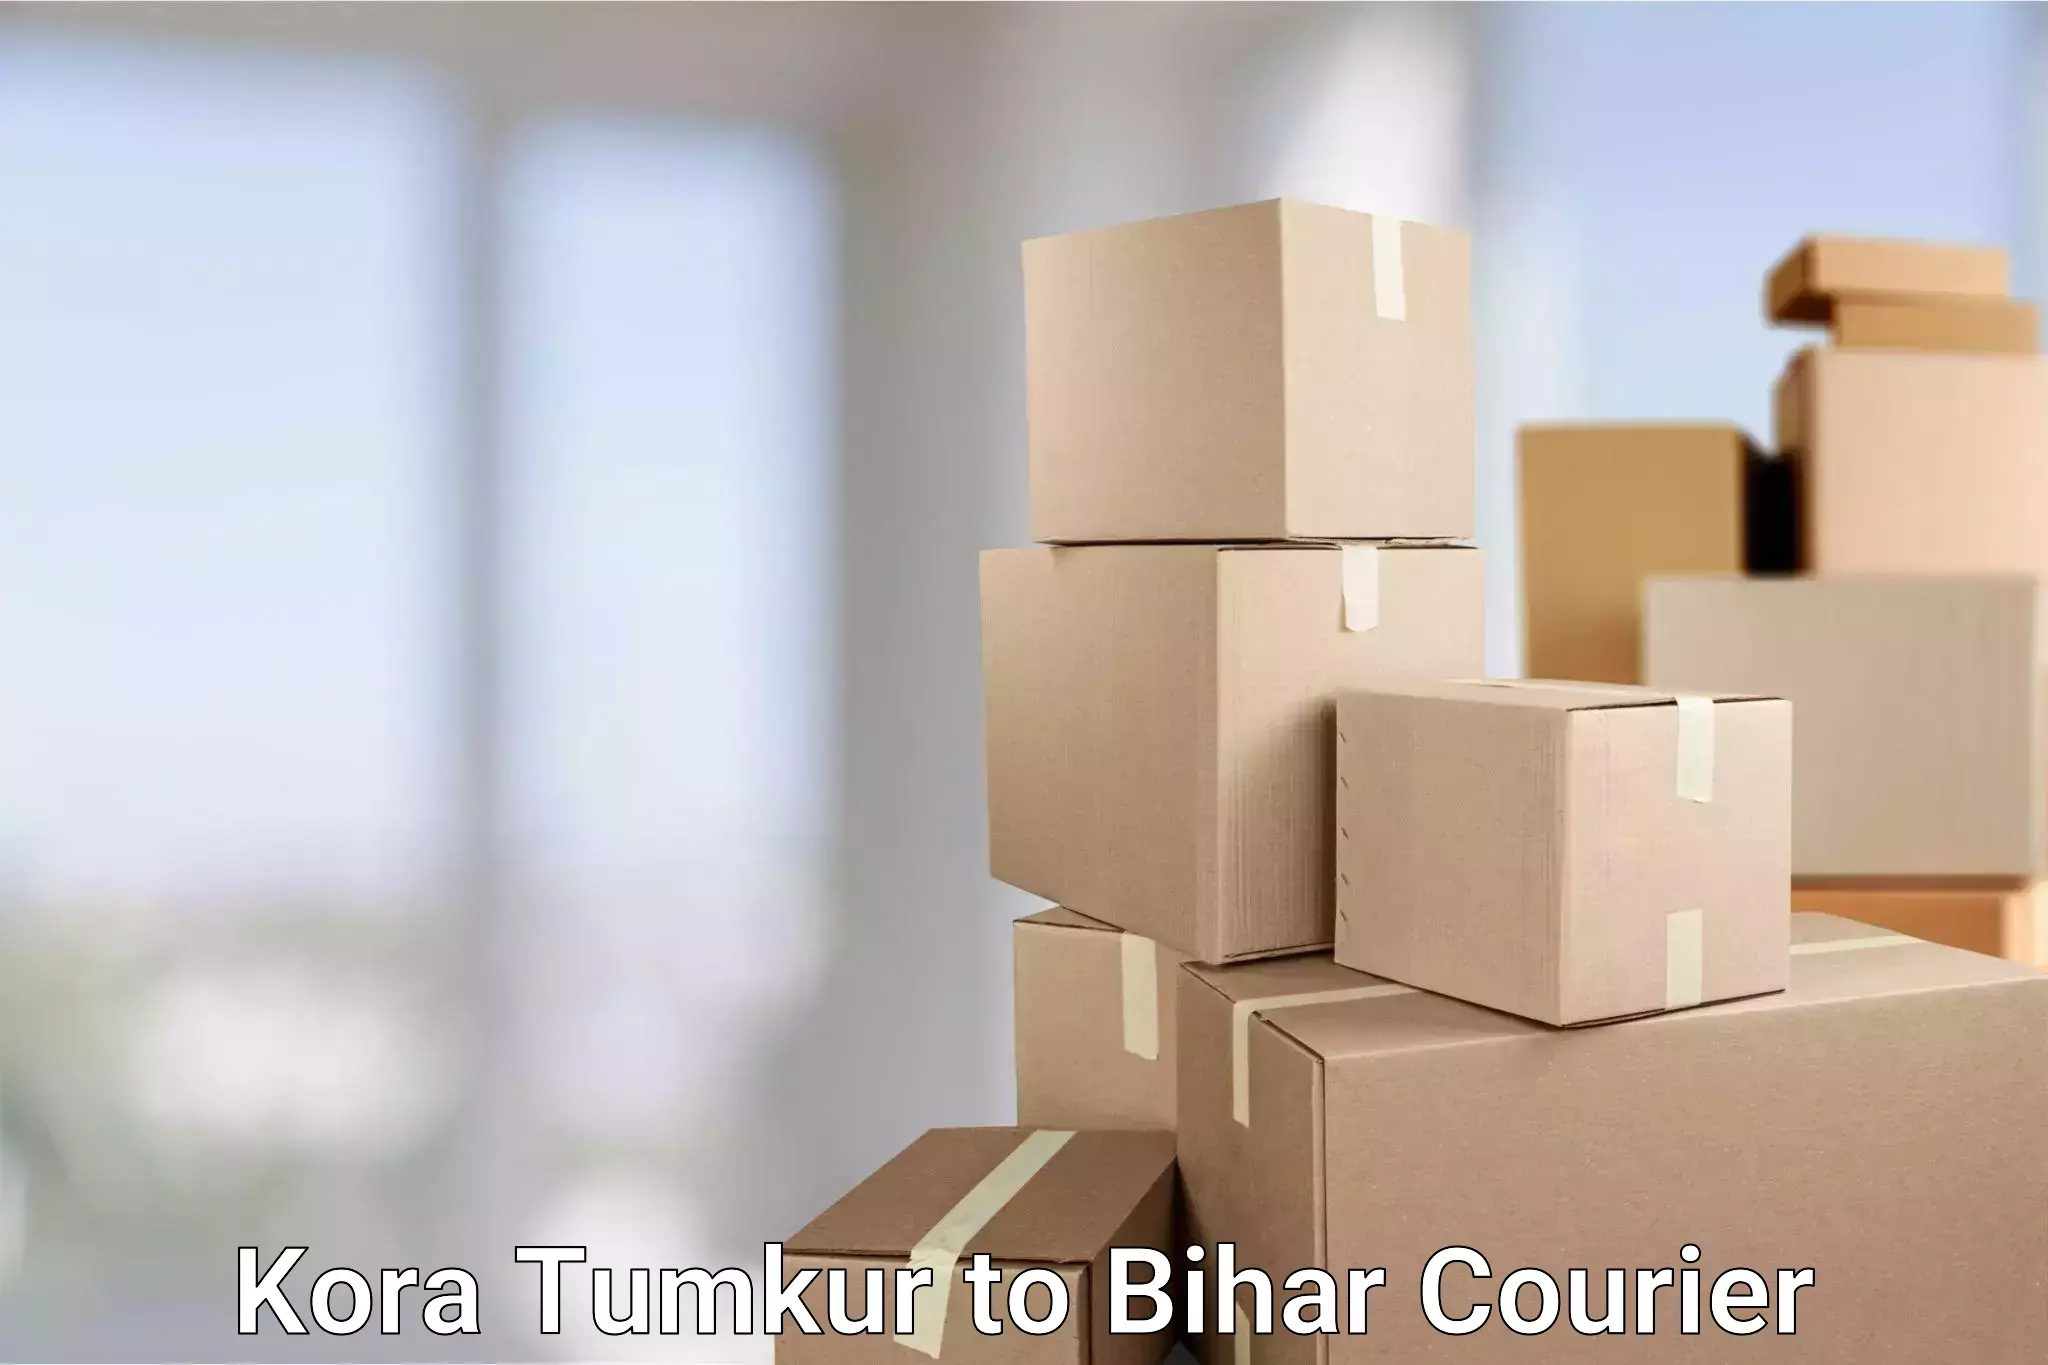 On-call courier service Kora Tumkur to Sheohar